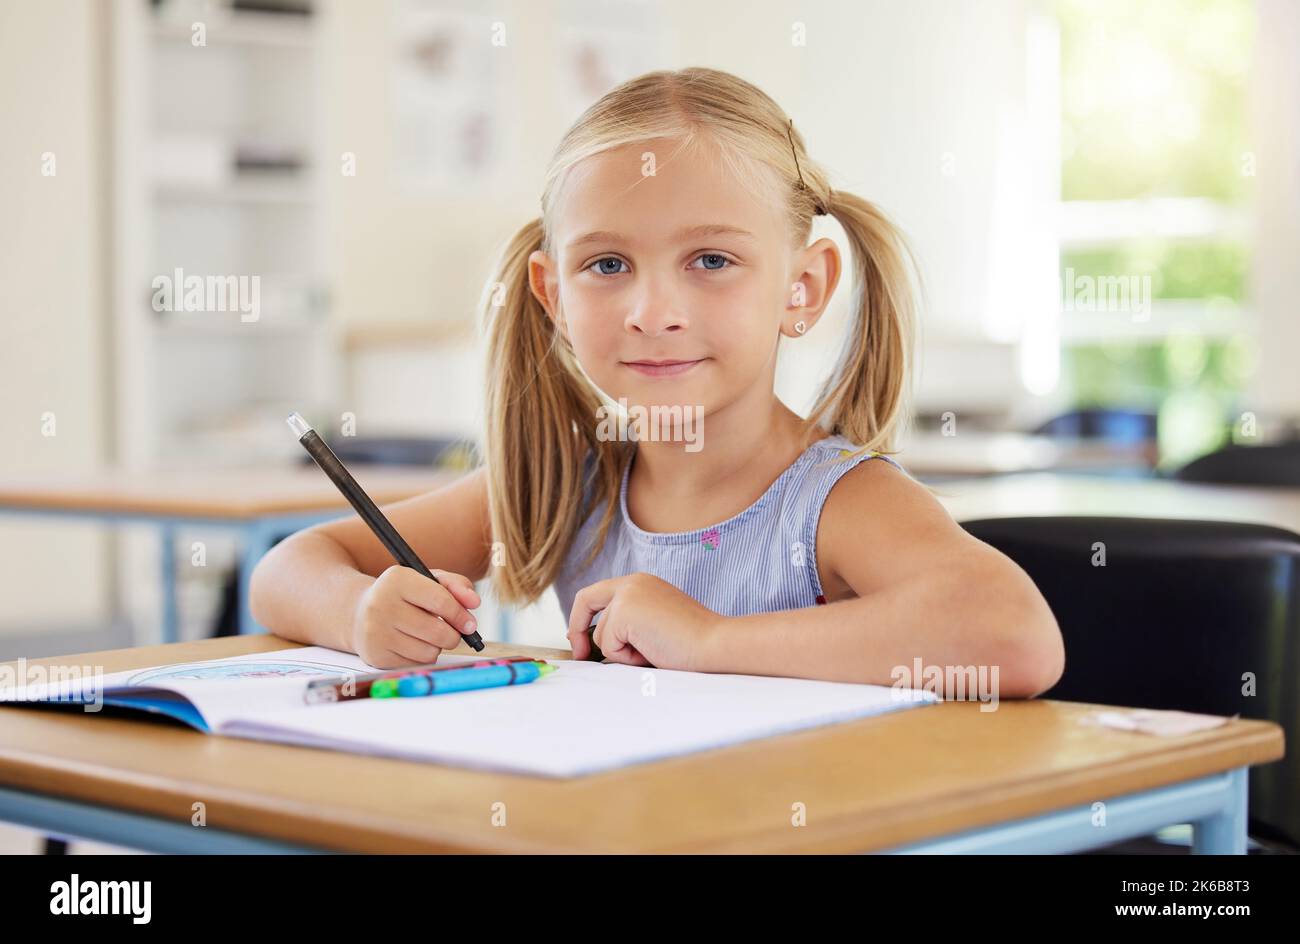 Preschool is an opportunity for growth. a preschooler colouring in class. Stock Photo